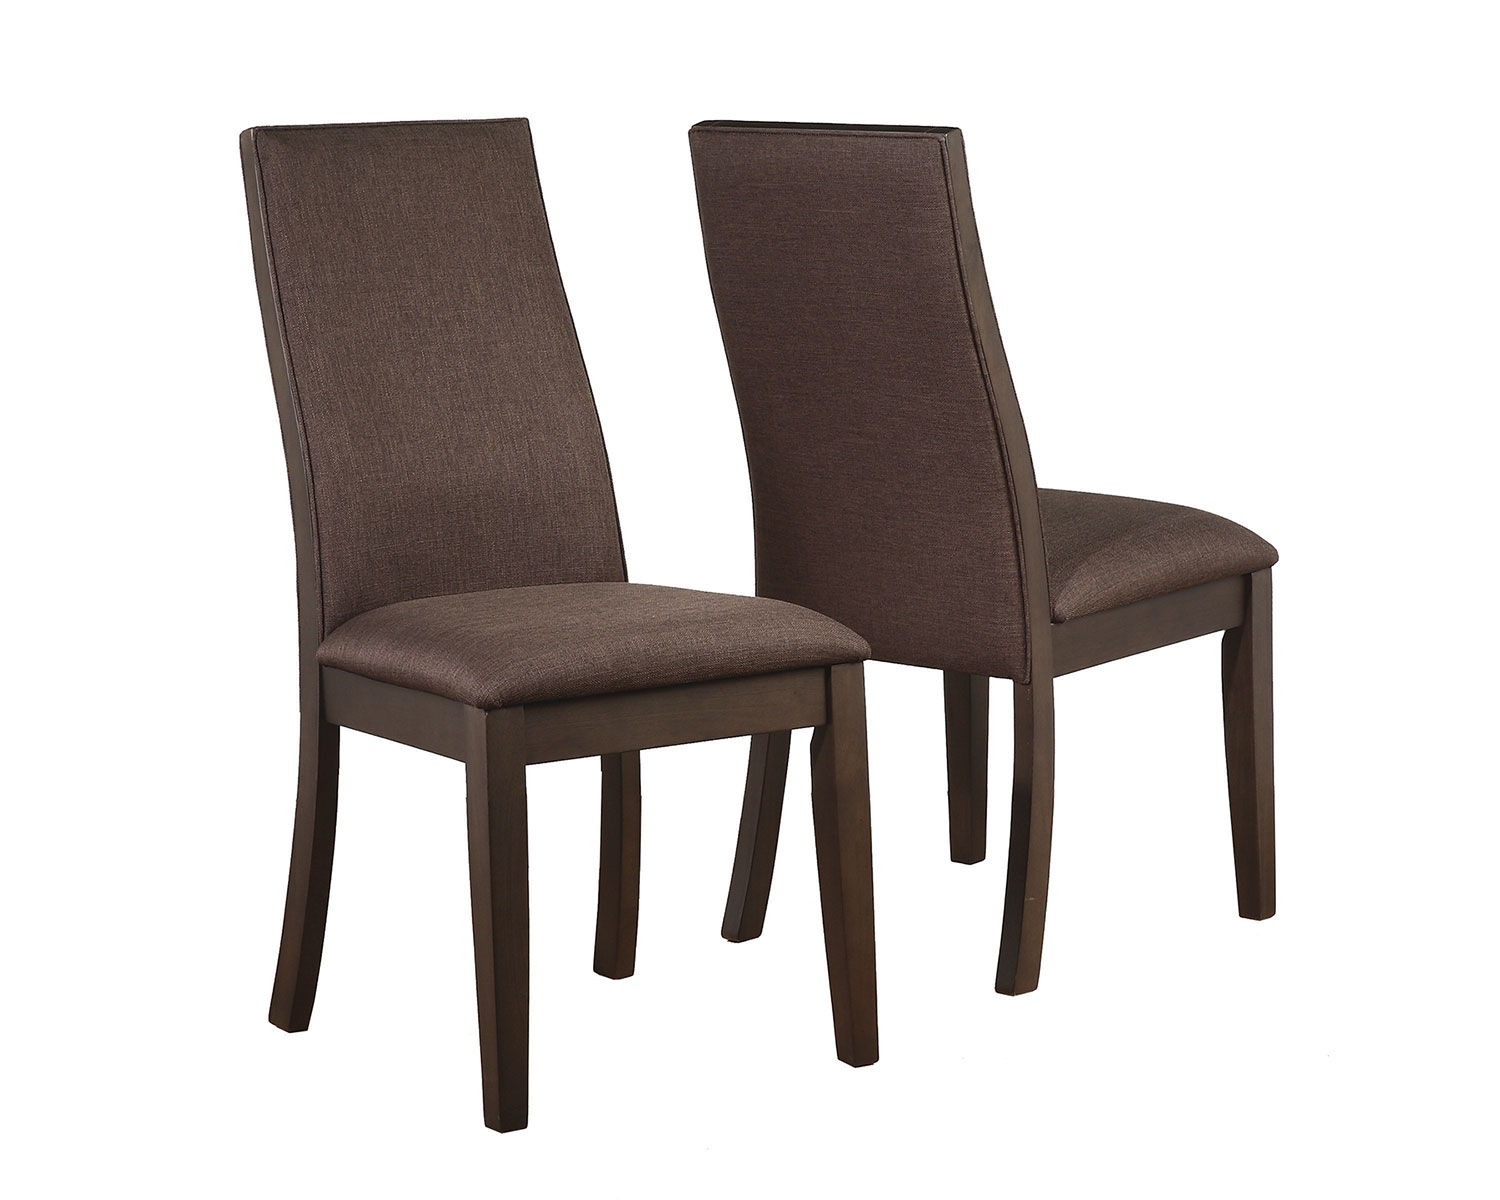 Coaster Spring Creek Dining Side Chair - Espresso Brown